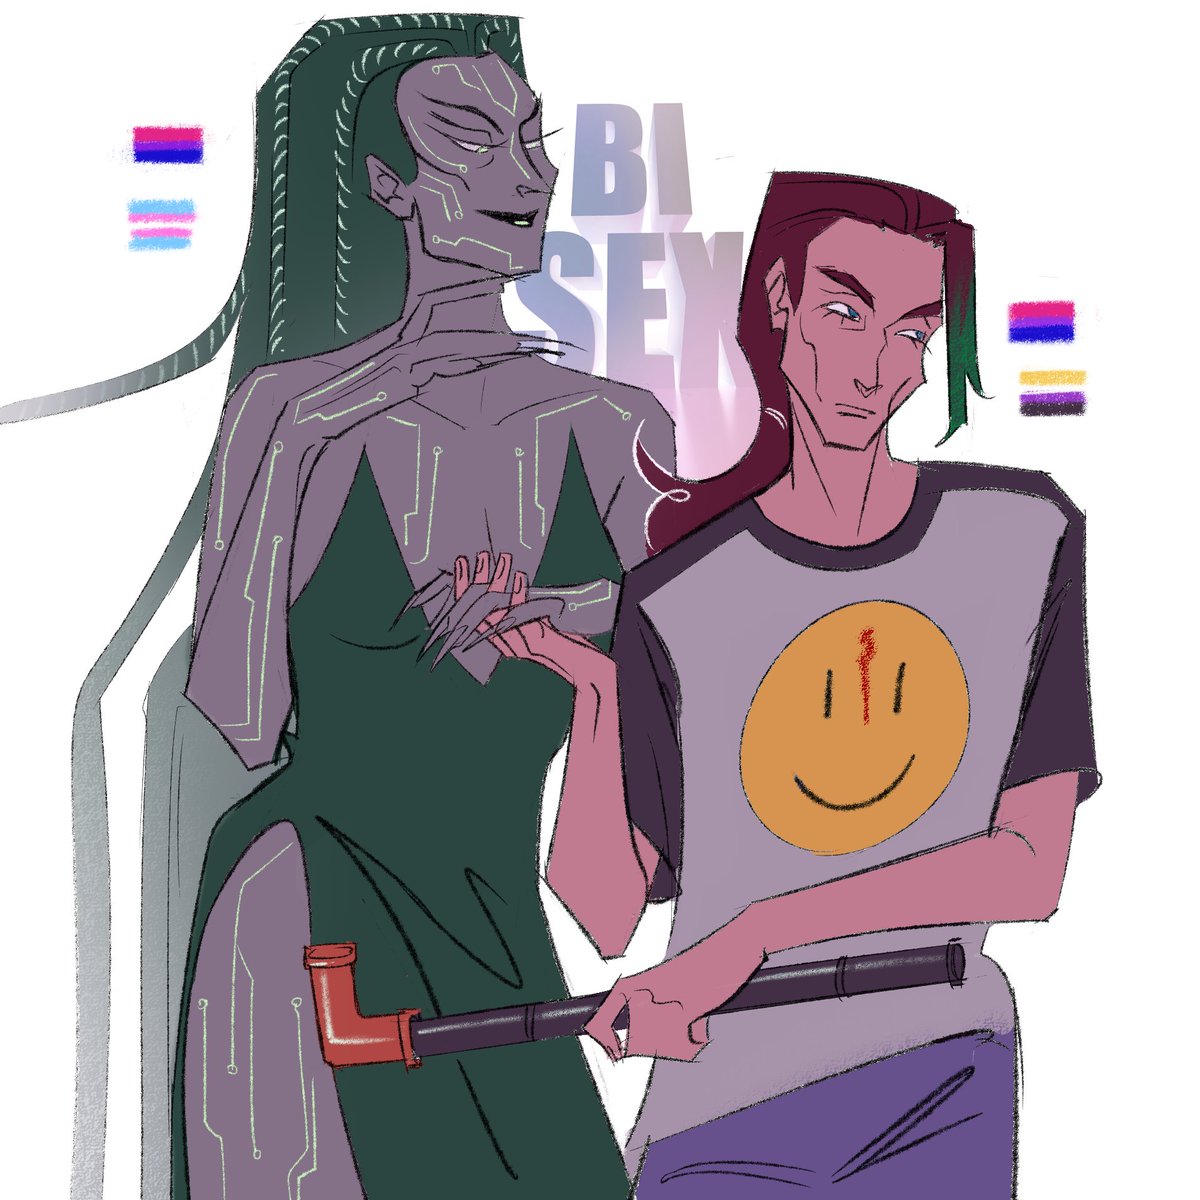 I've discovered an important thing about myself recently so im celebrating #BiVisibilityMonth with my silly little drawing of Shodan and Hacker